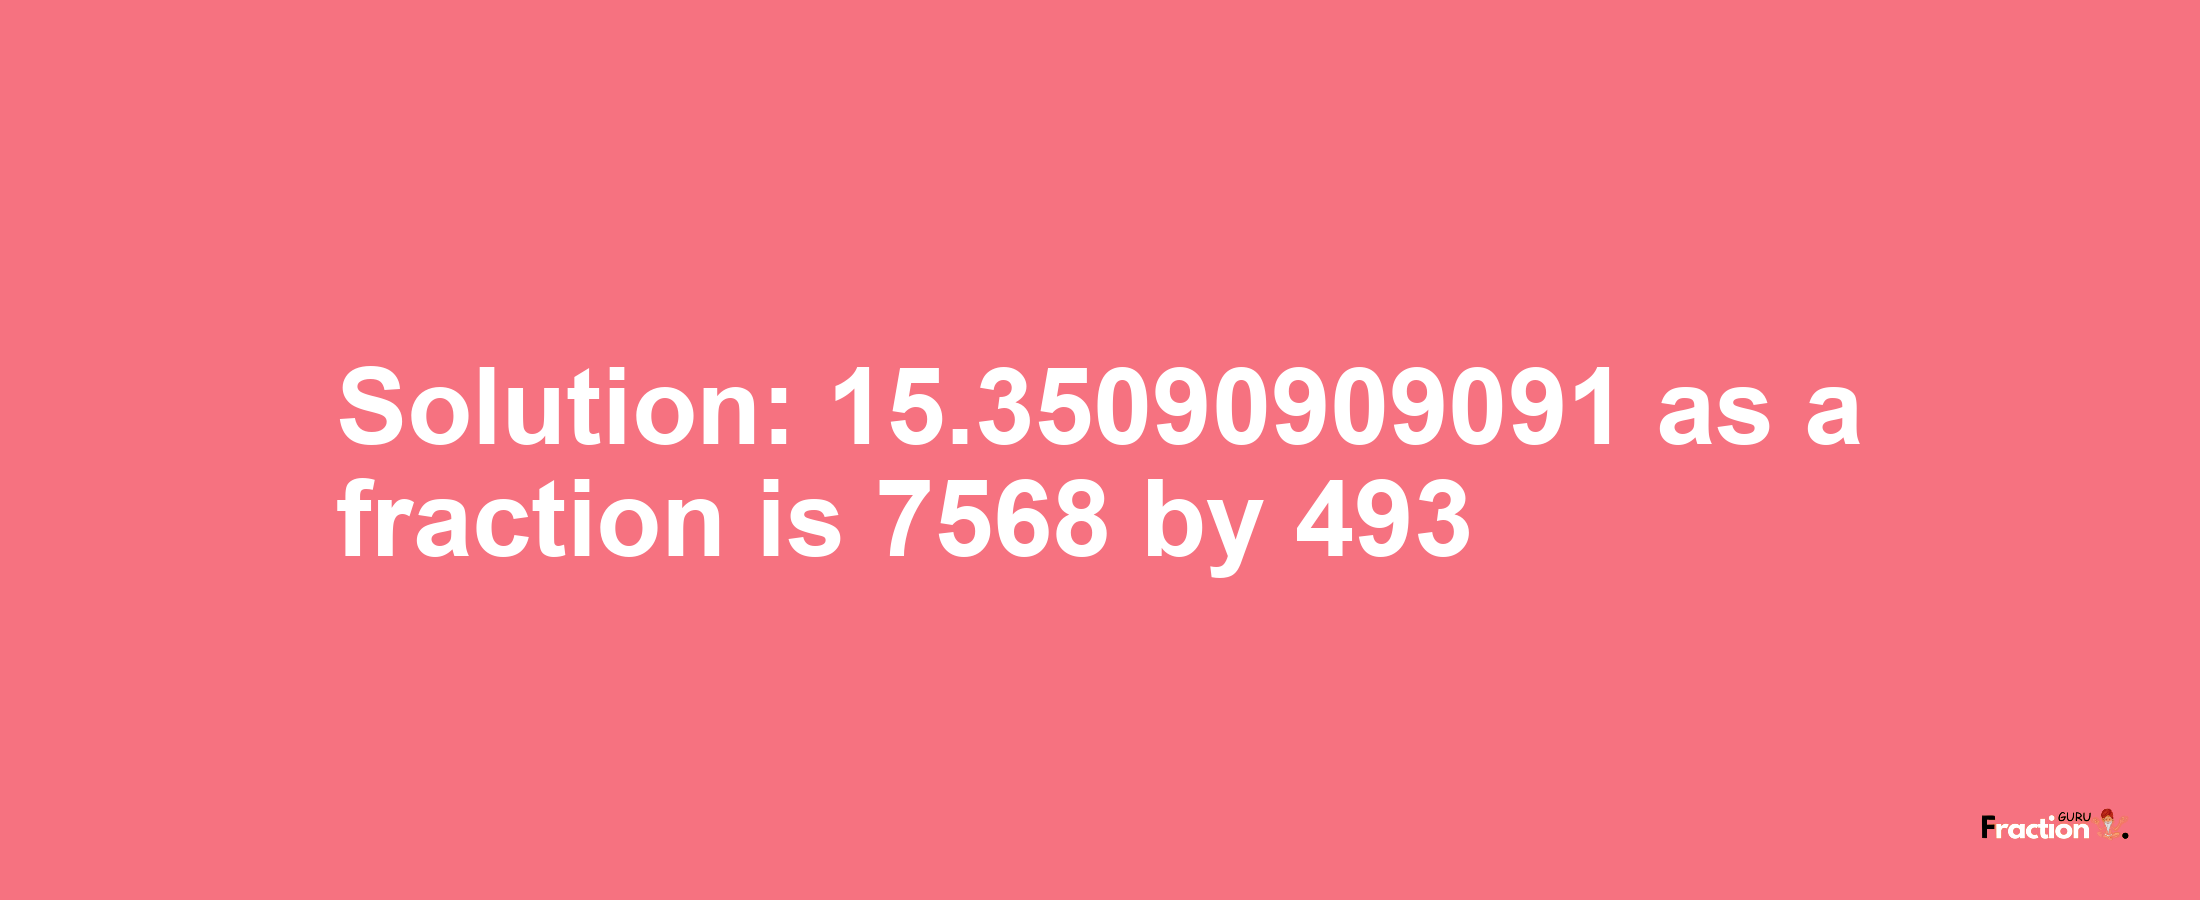 Solution:15.35090909091 as a fraction is 7568/493